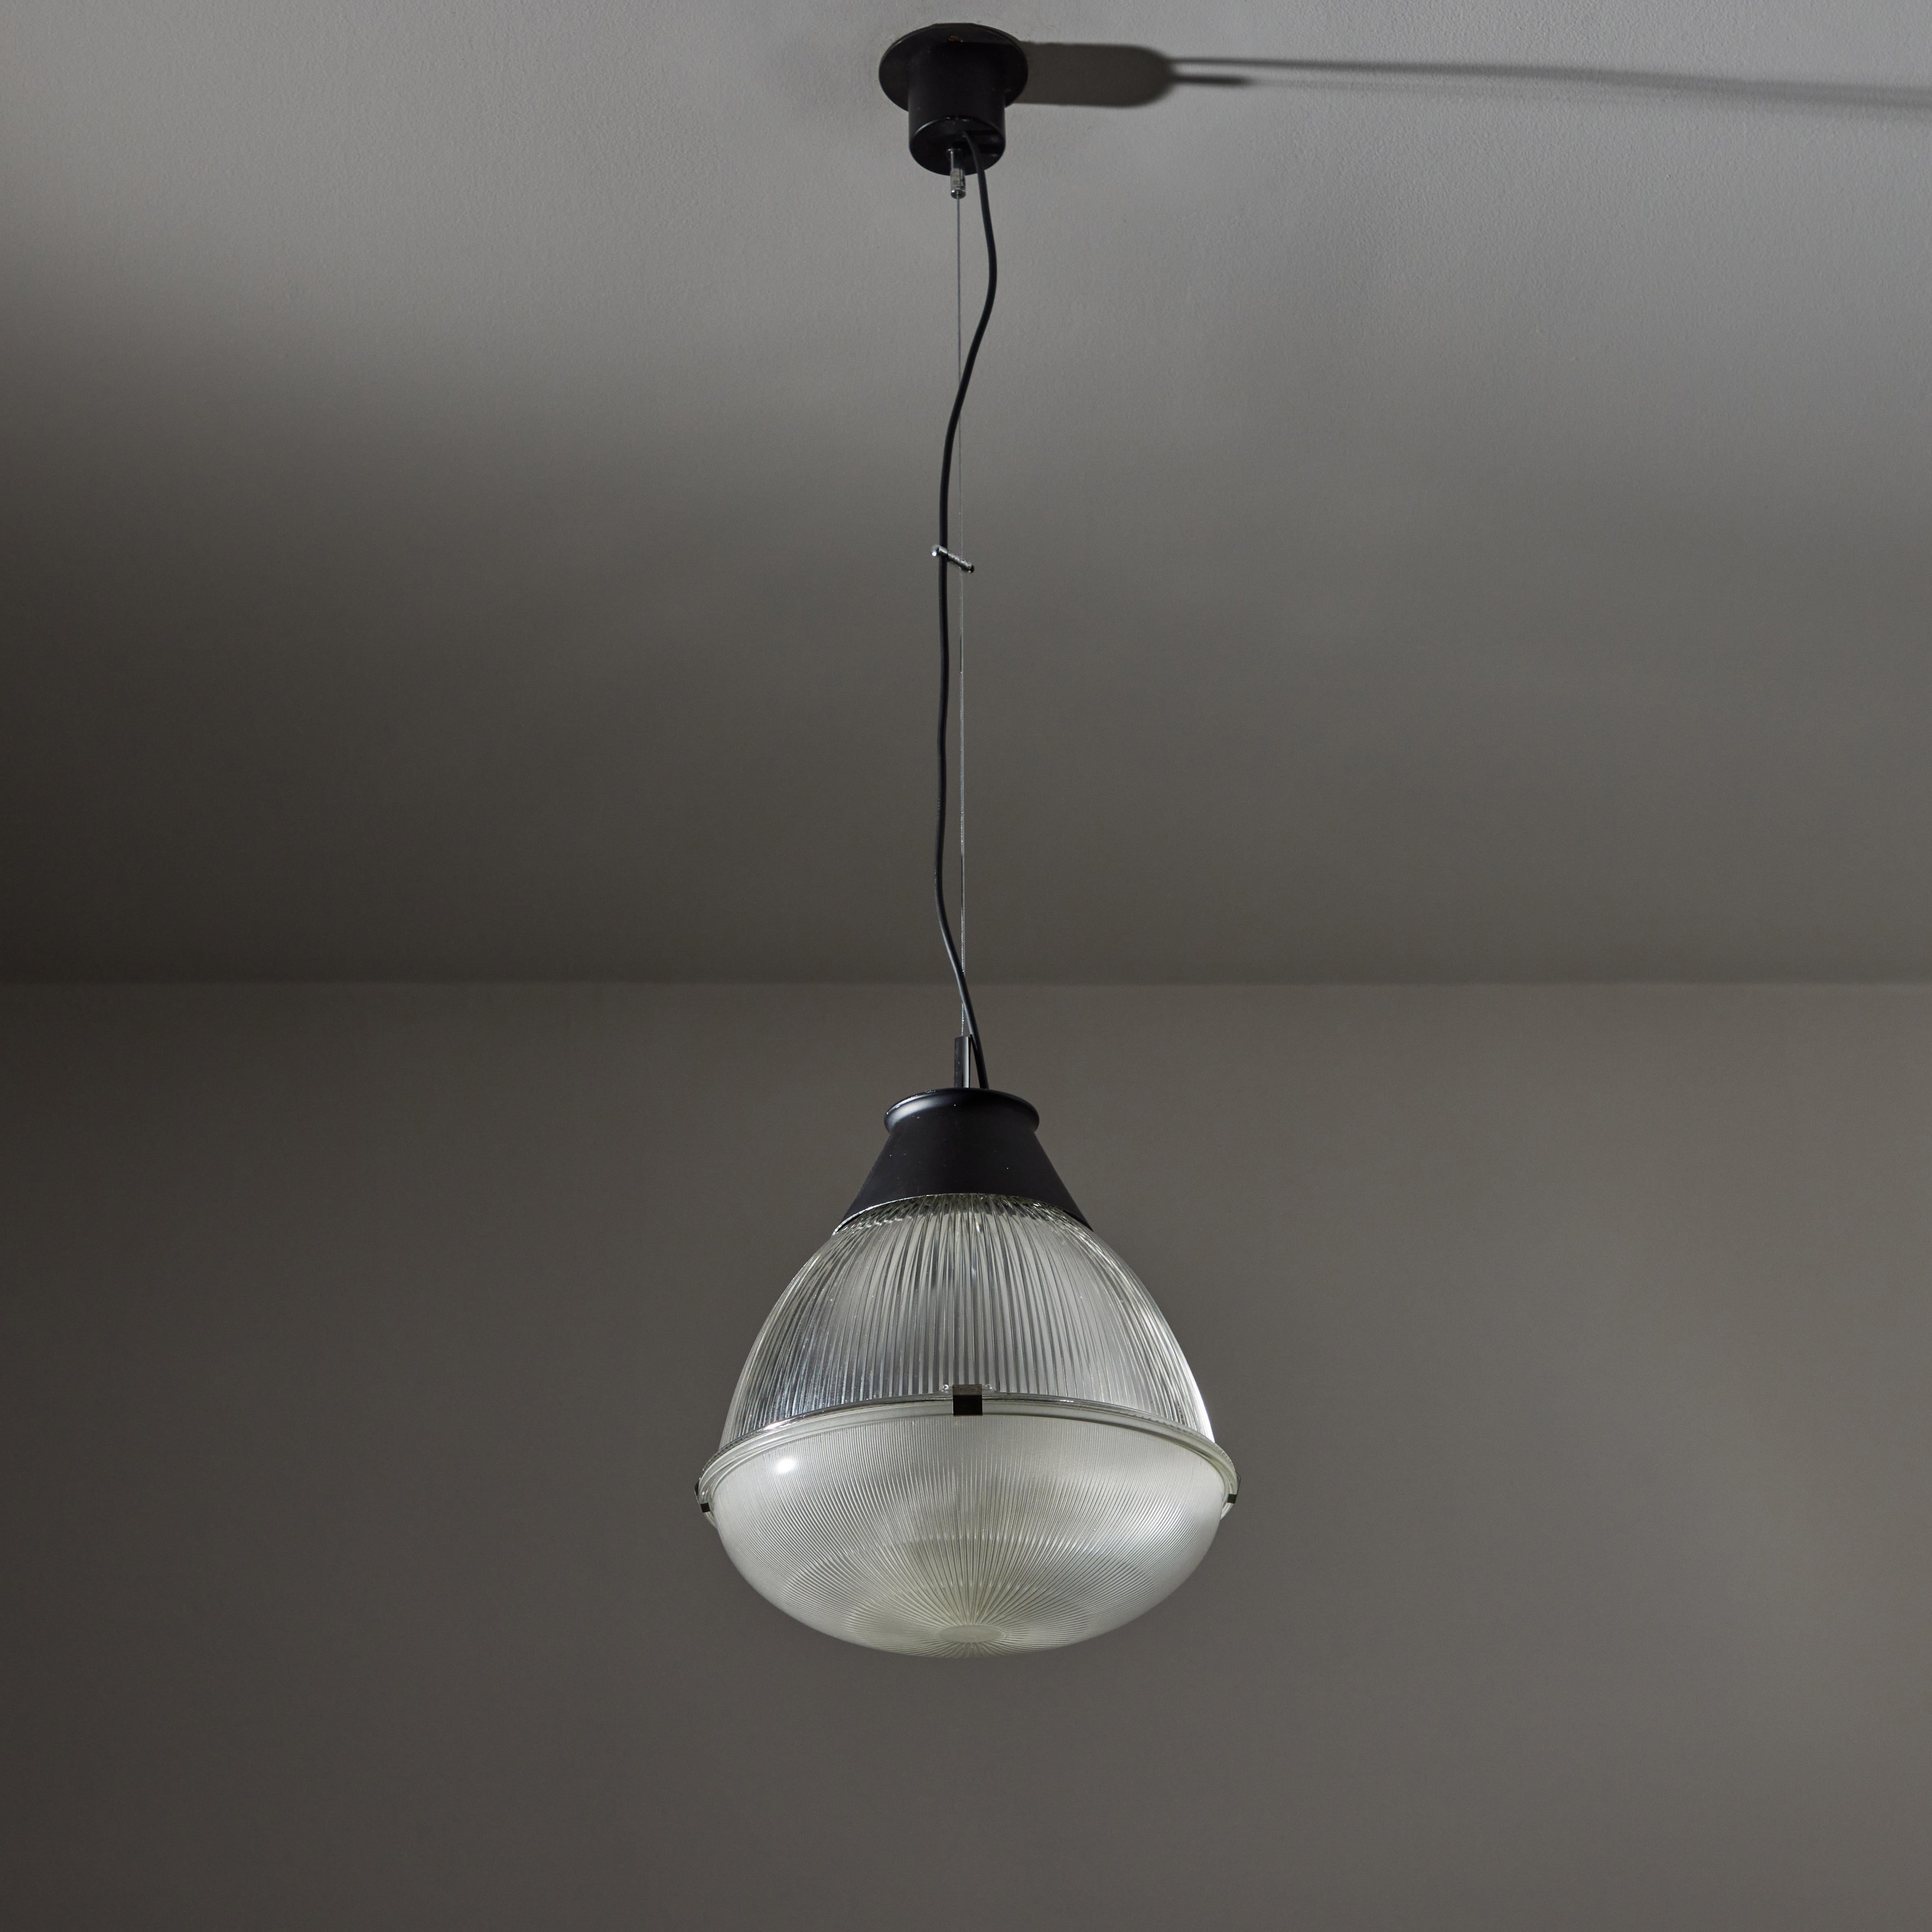 Mid-20th Century Model 4409 Pendant Lights by Tito Agnoli for Oluce For Sale